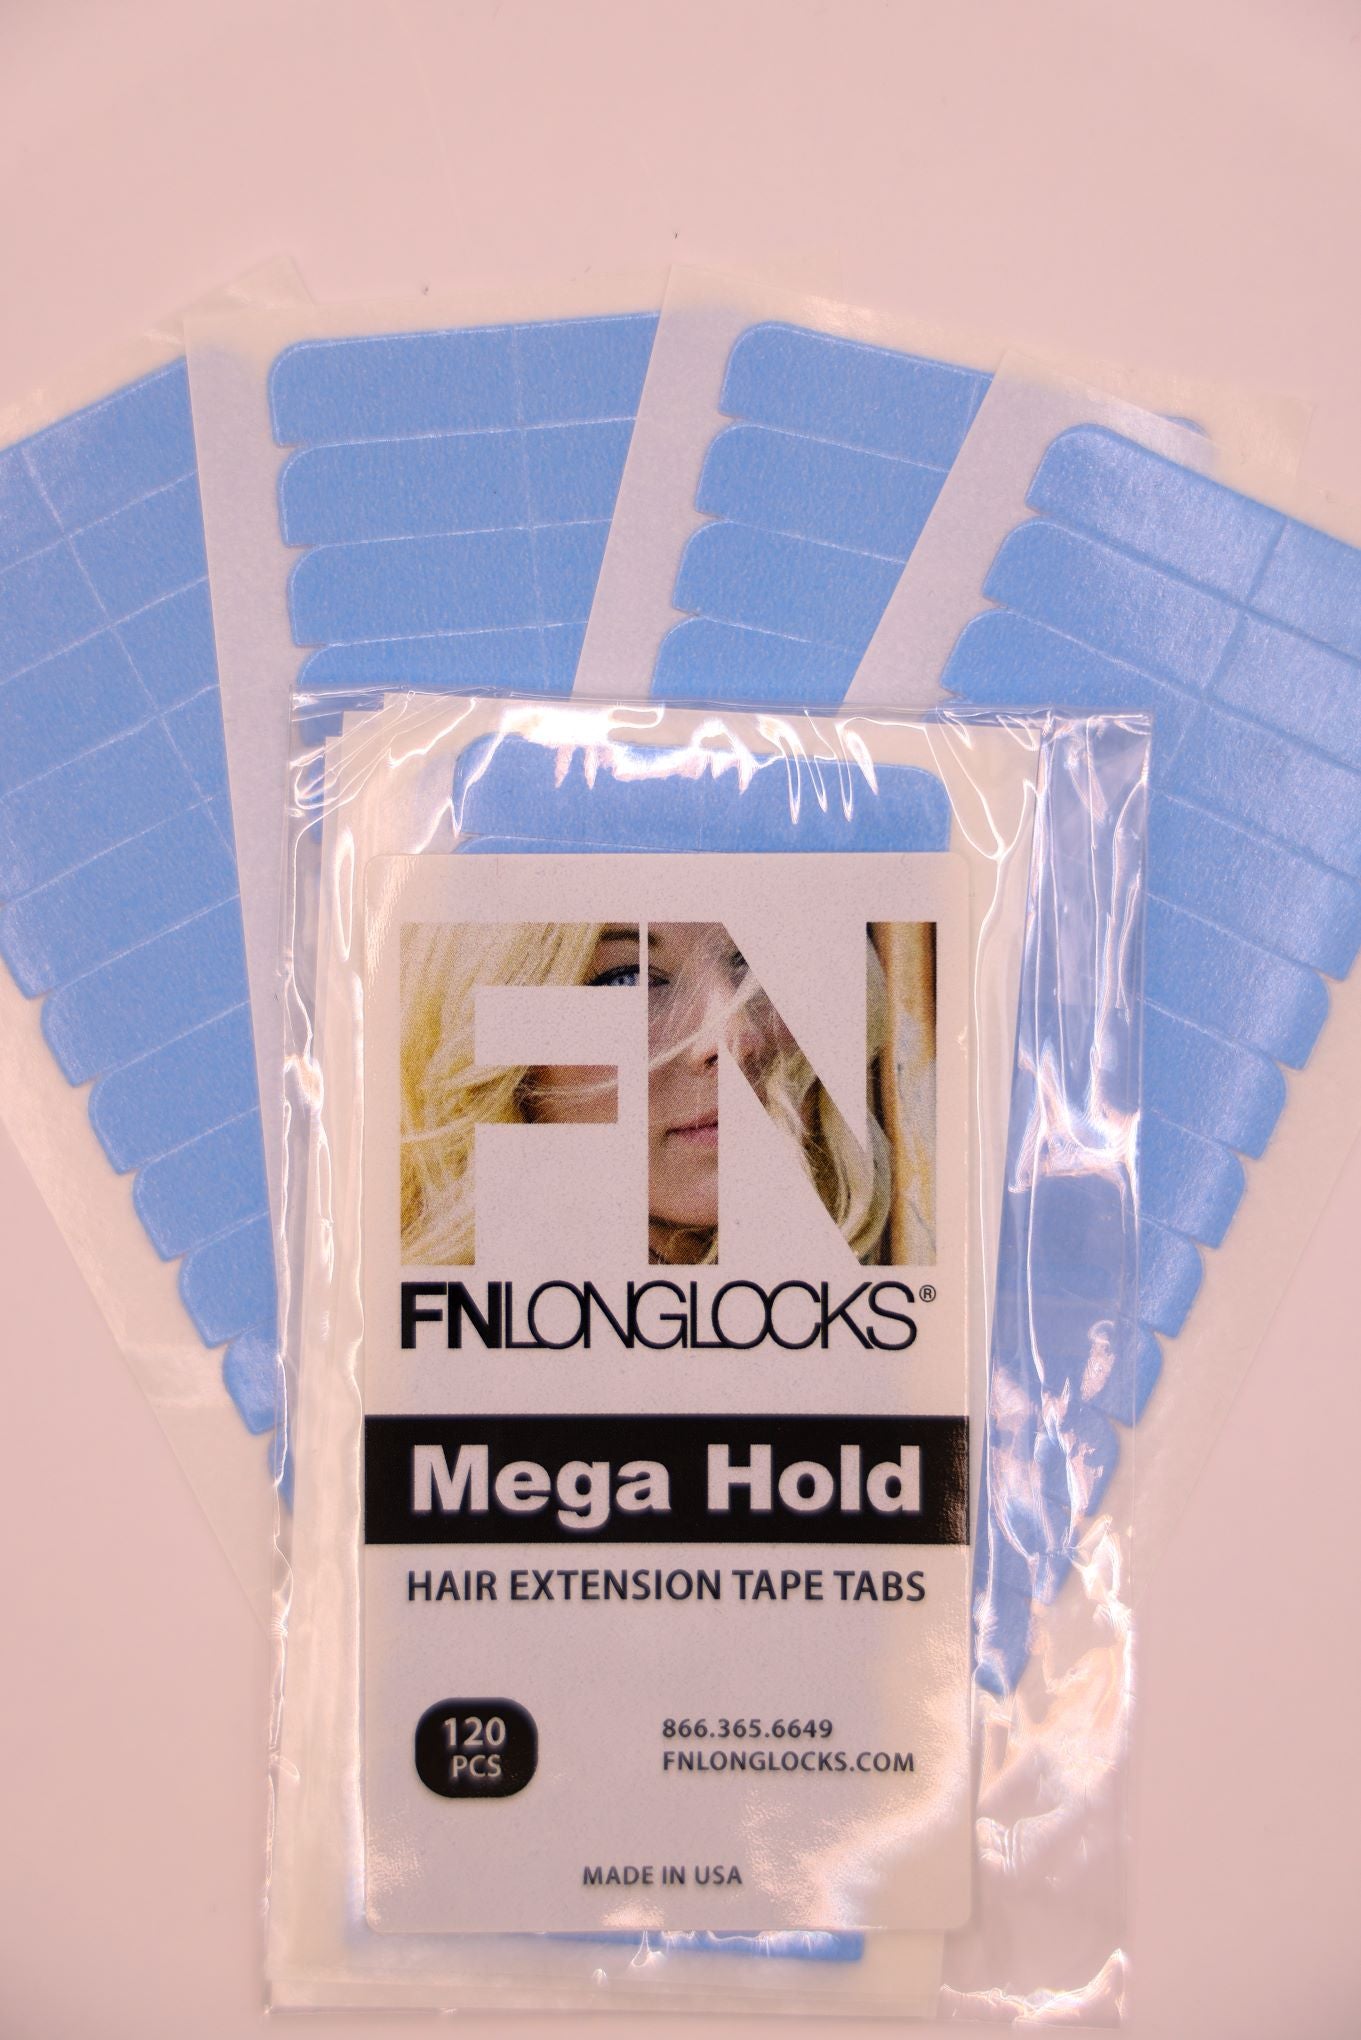 Super Hold Hair Extension Tape Tabs